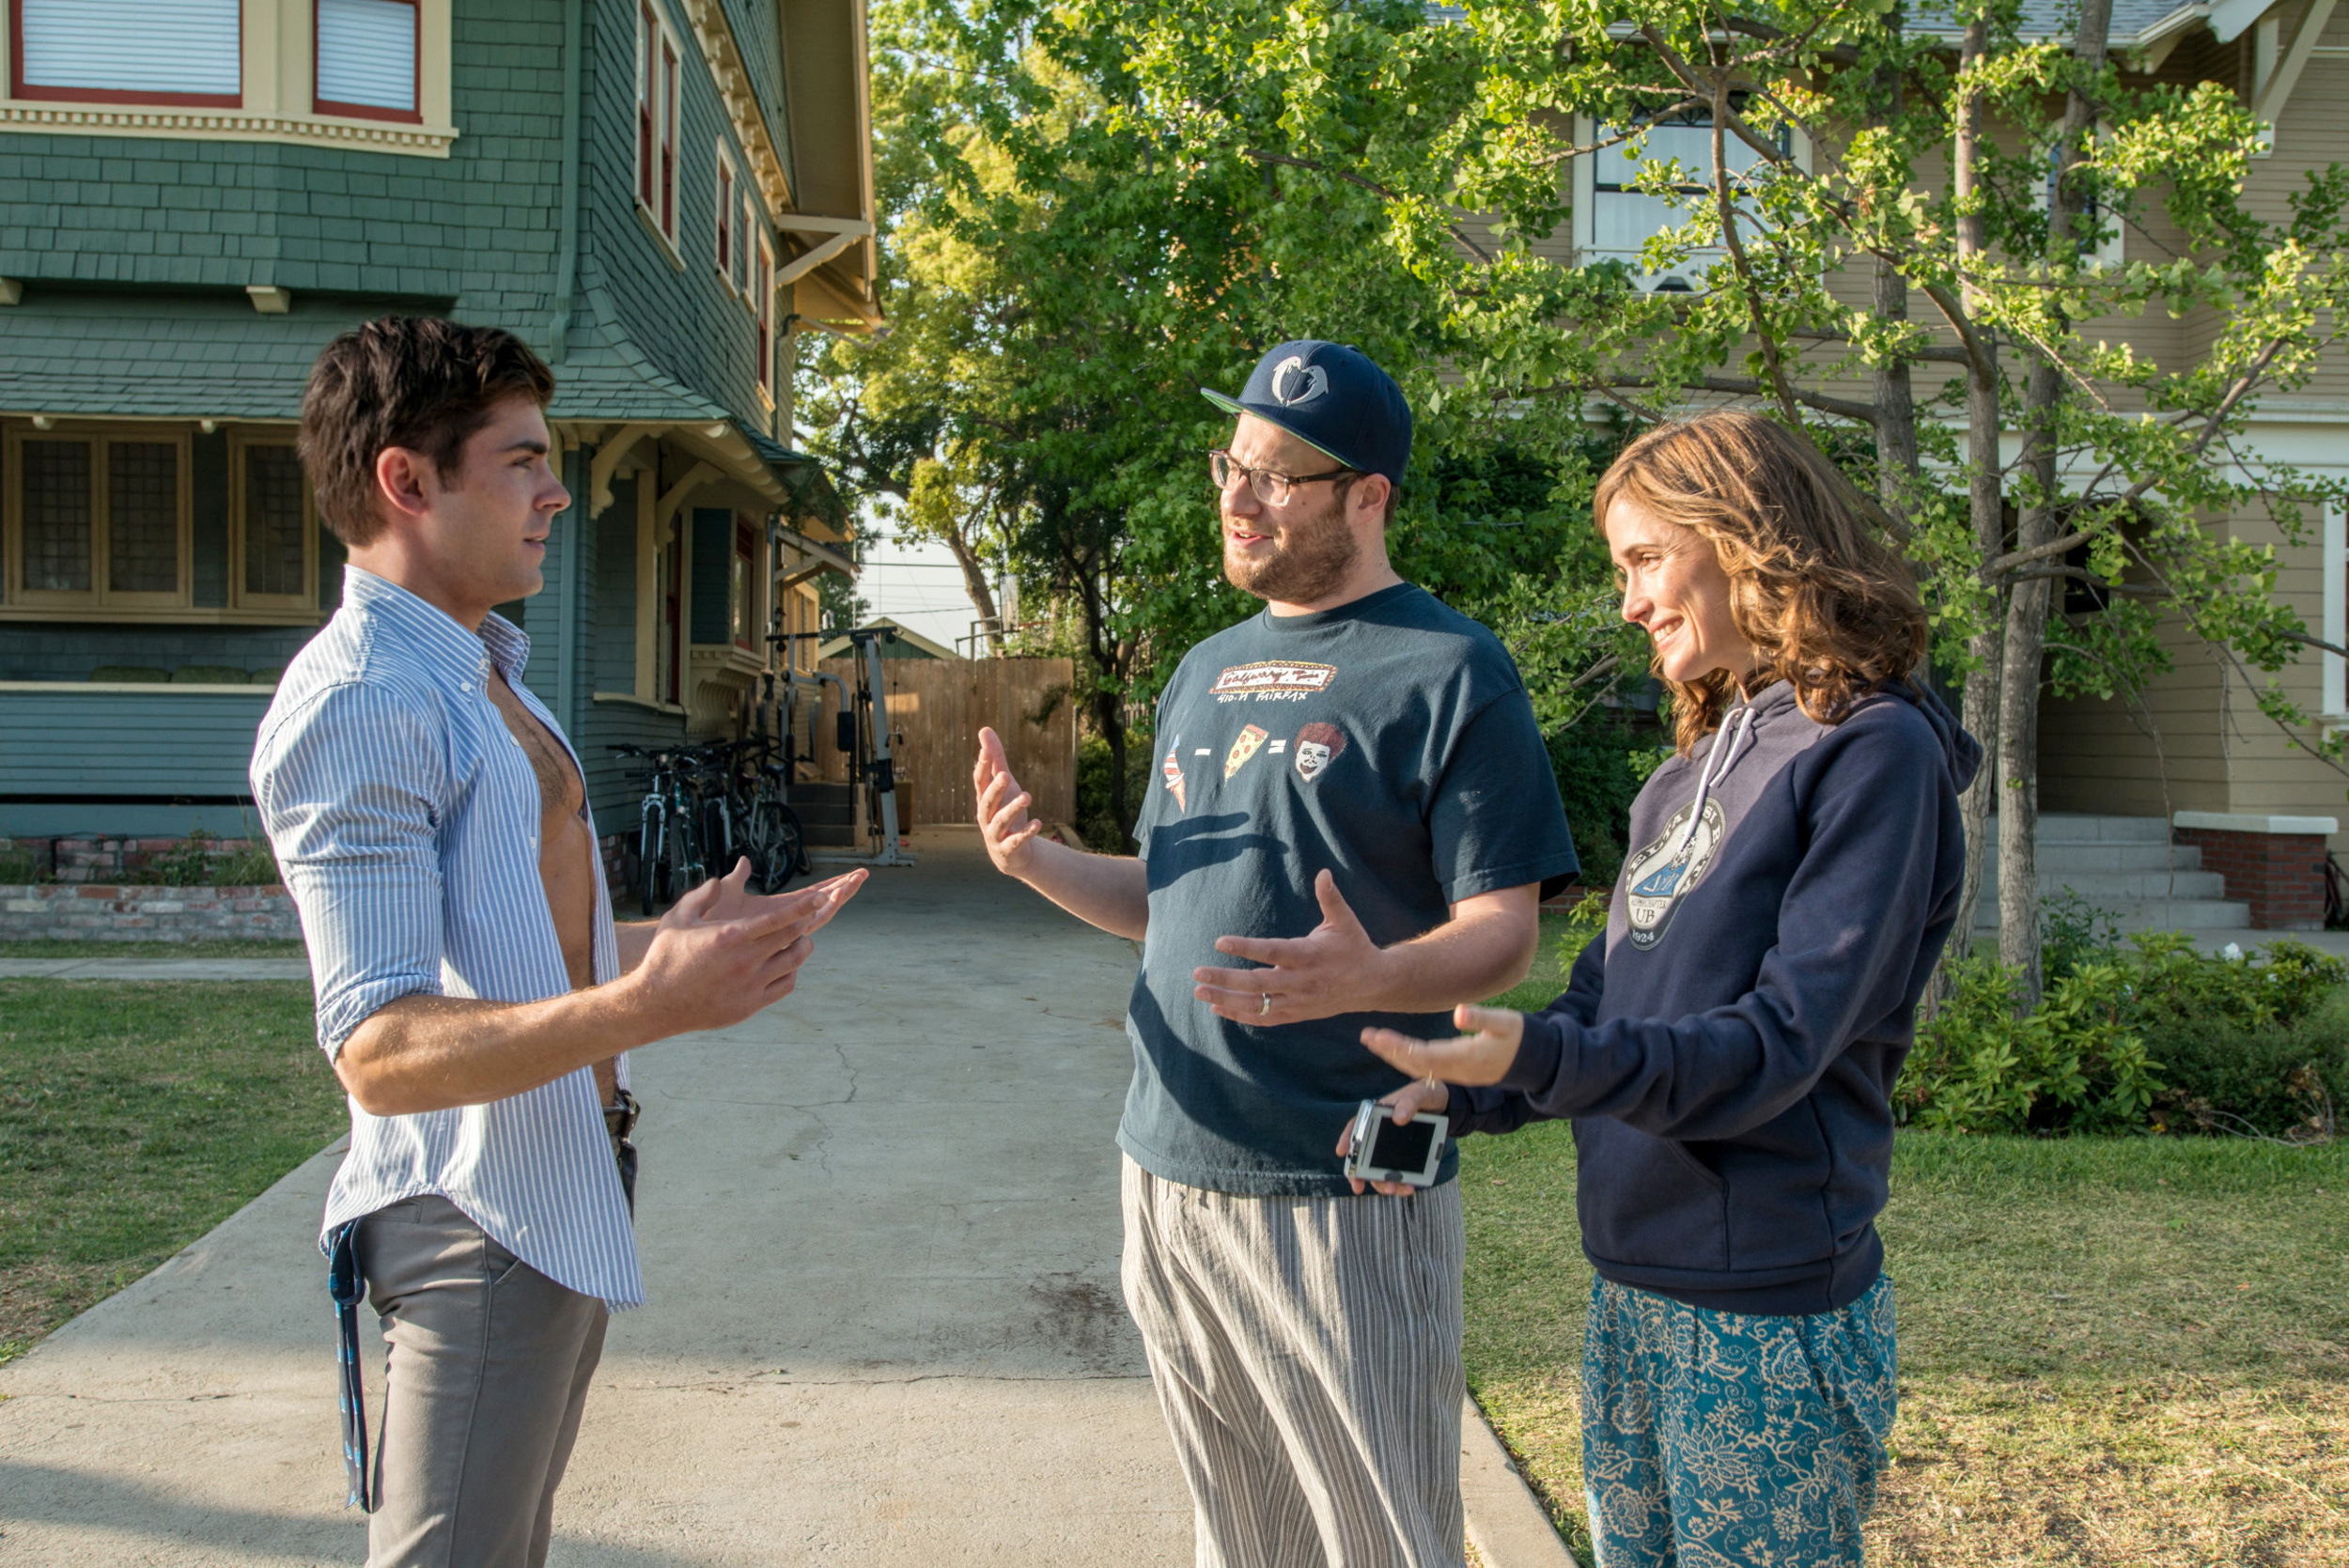 <p>A rowdy fraternity moving in next to two new parents sounds like a nightmare…or the ingredients for an outrageous comedy. At least that’s the case with <em>Neighbors</em>, the 2014 Nicholas Stoller film that pits Seth Rogen and Rose Byrne against Zac Efron, Dave Franco, Christopher Mintz-Plasse, and the rest of the hard-partying Delta Psi Beta. Critics were kind to <em>Neighbors</em>, and audiences were even more delighted, especially upon seeing the then-27-year-old Efron successfully shedding his Disney teeny-bopper image.</p><p><a href='https://www.msn.com/en-us/community/channel/vid-cj9pqbr0vn9in2b6ddcd8sfgpfq6x6utp44fssrv6mc2gtybw0us'>Follow us on MSN to see more of our exclusive entertainment content.</a></p>